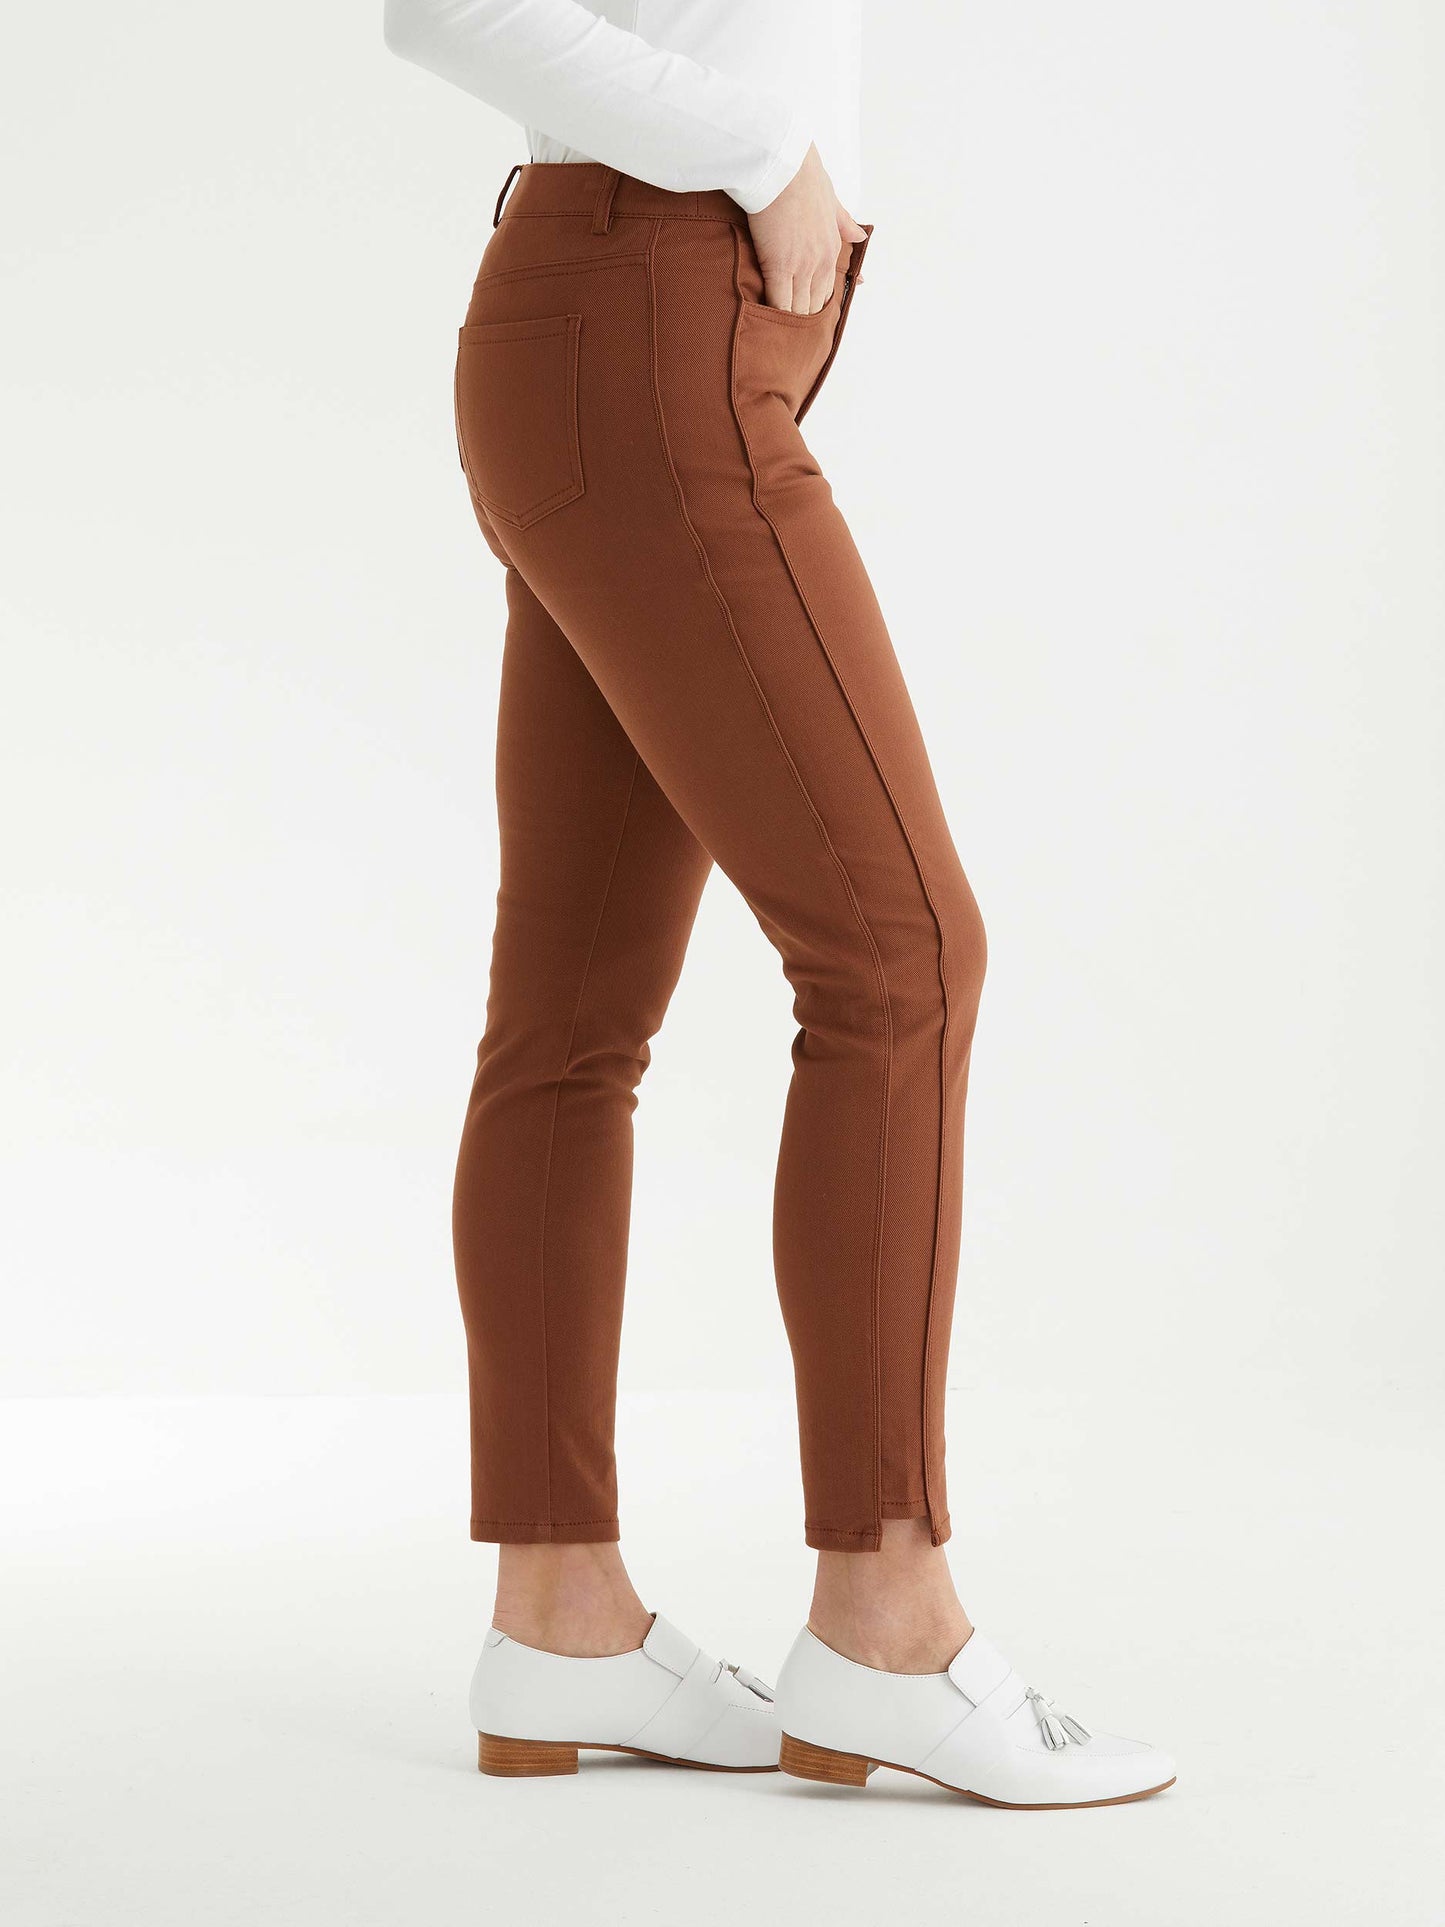 Marco polo Panelled jean copper side